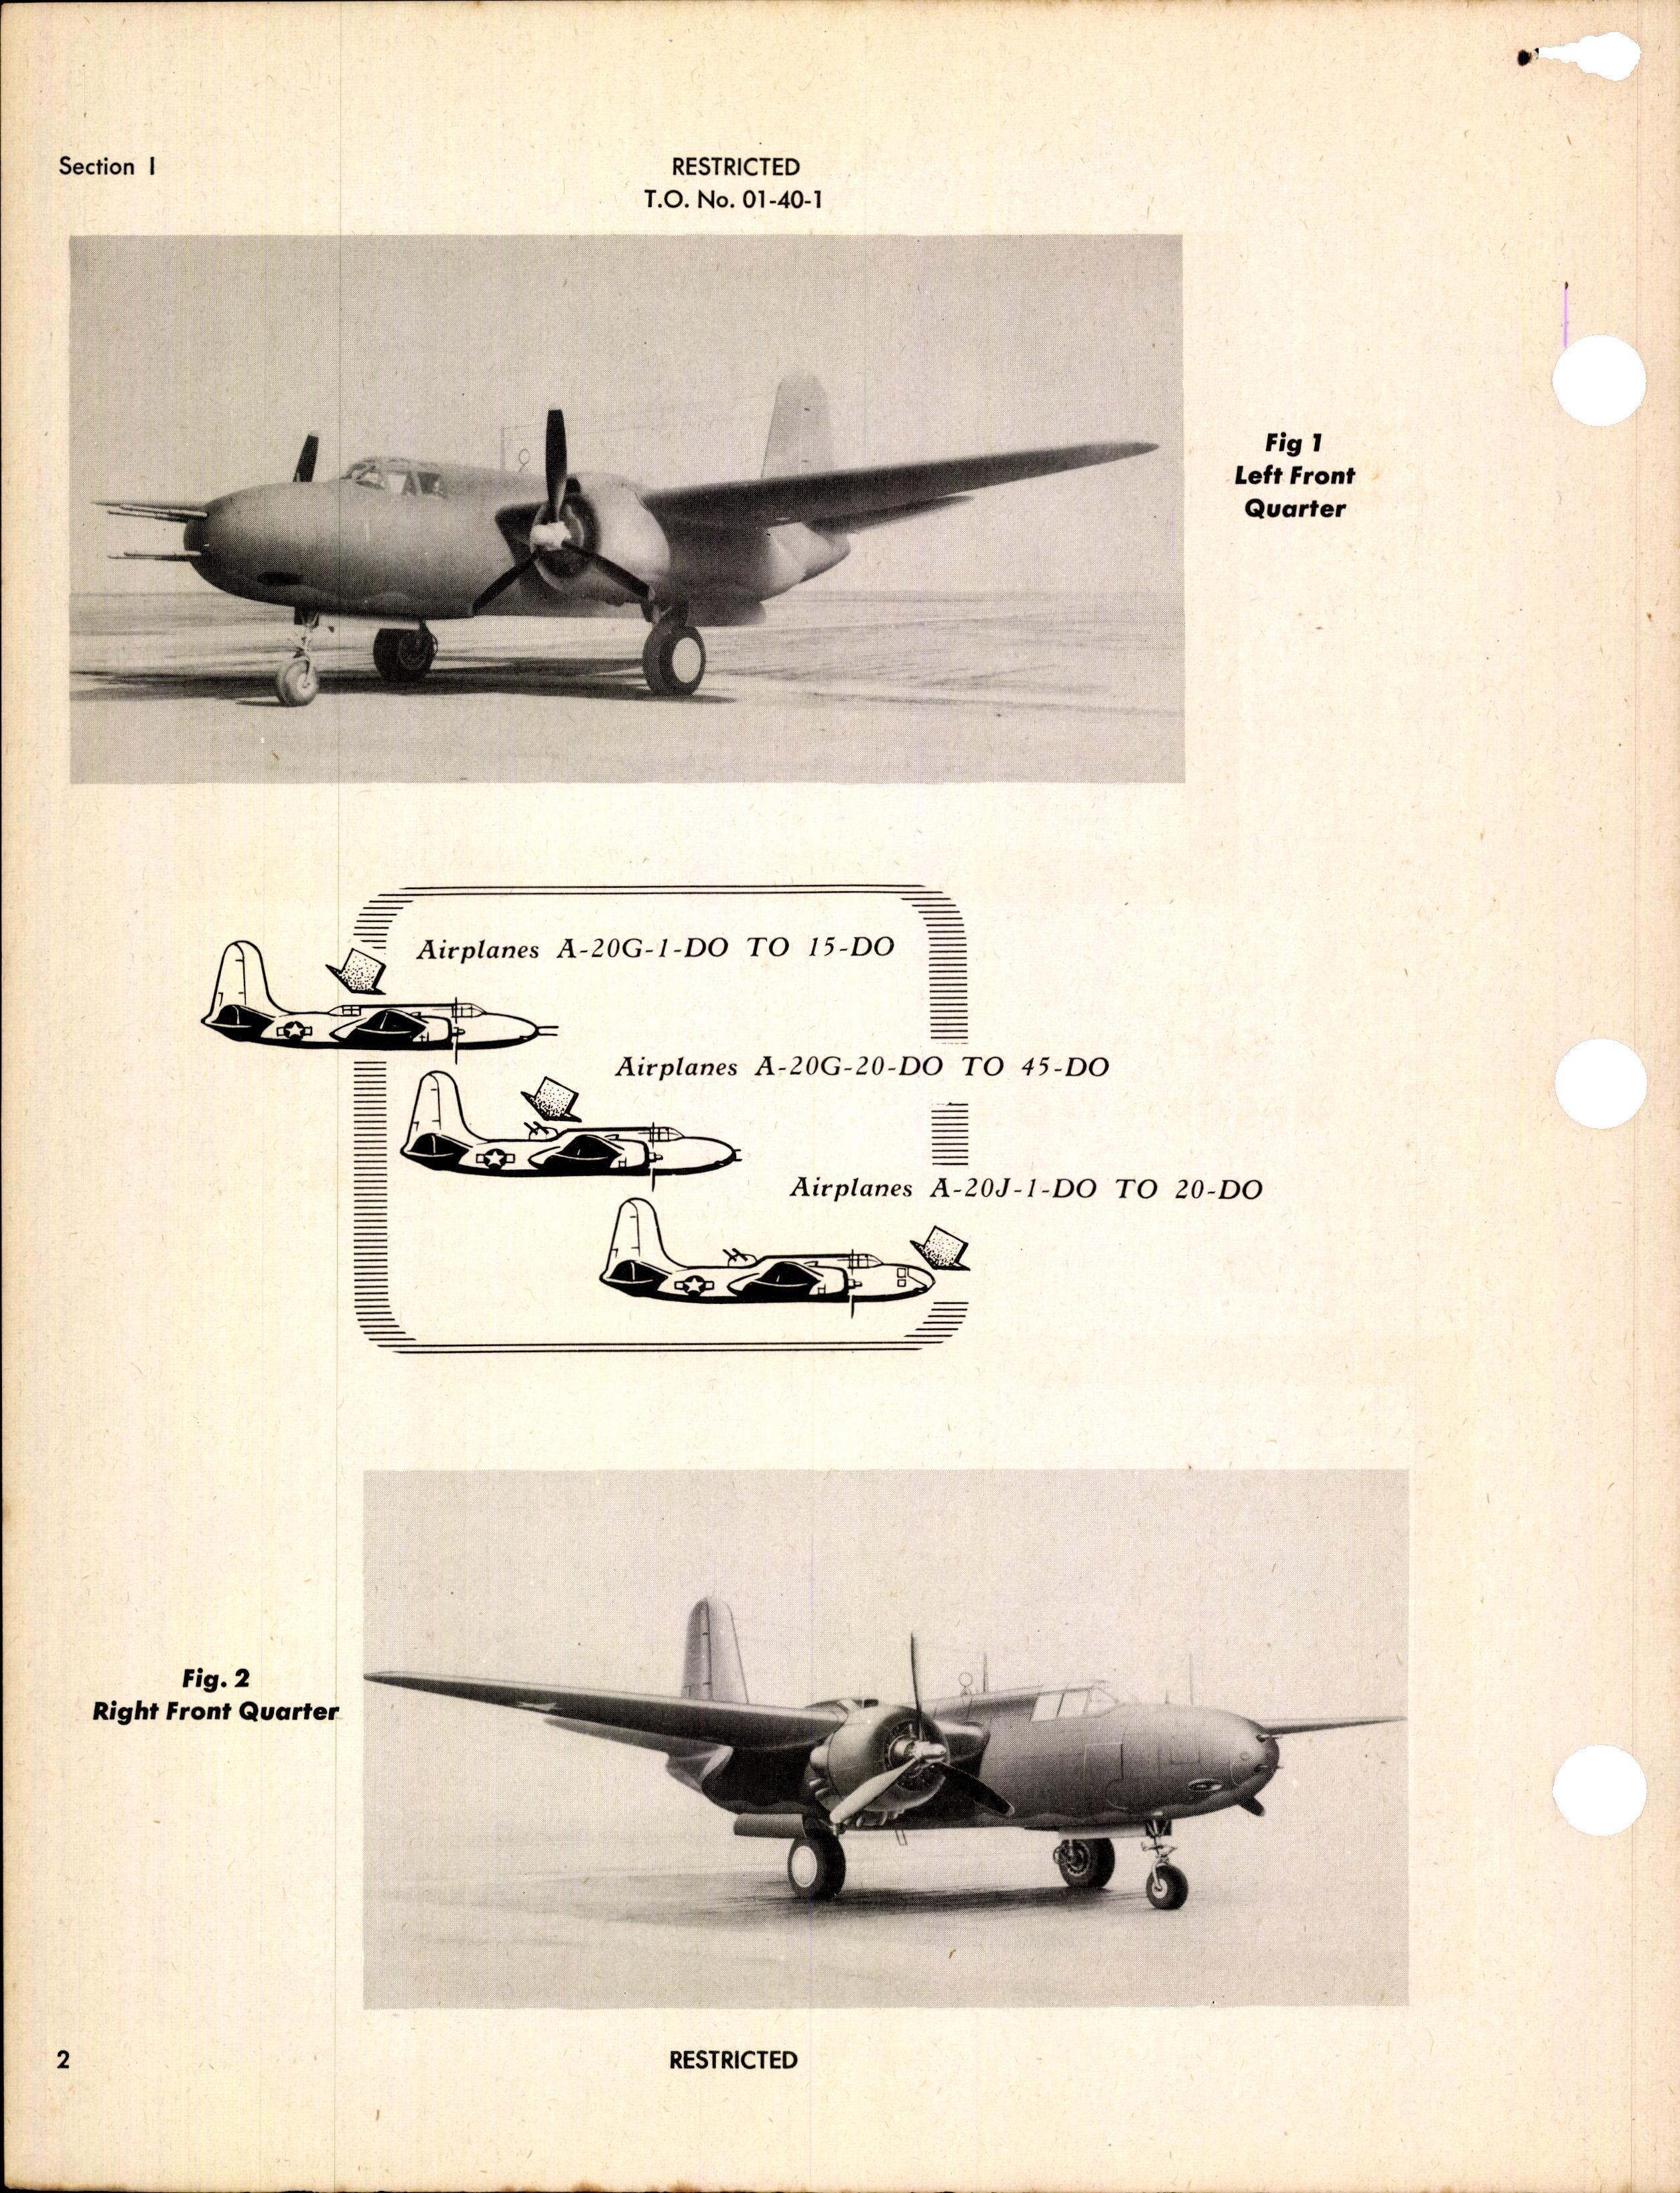 Sample page 4 from AirCorps Library document: Pilot's Flight Operating Instructions for A-20G, A-20J Series, P-70A-2, and P-70B-2